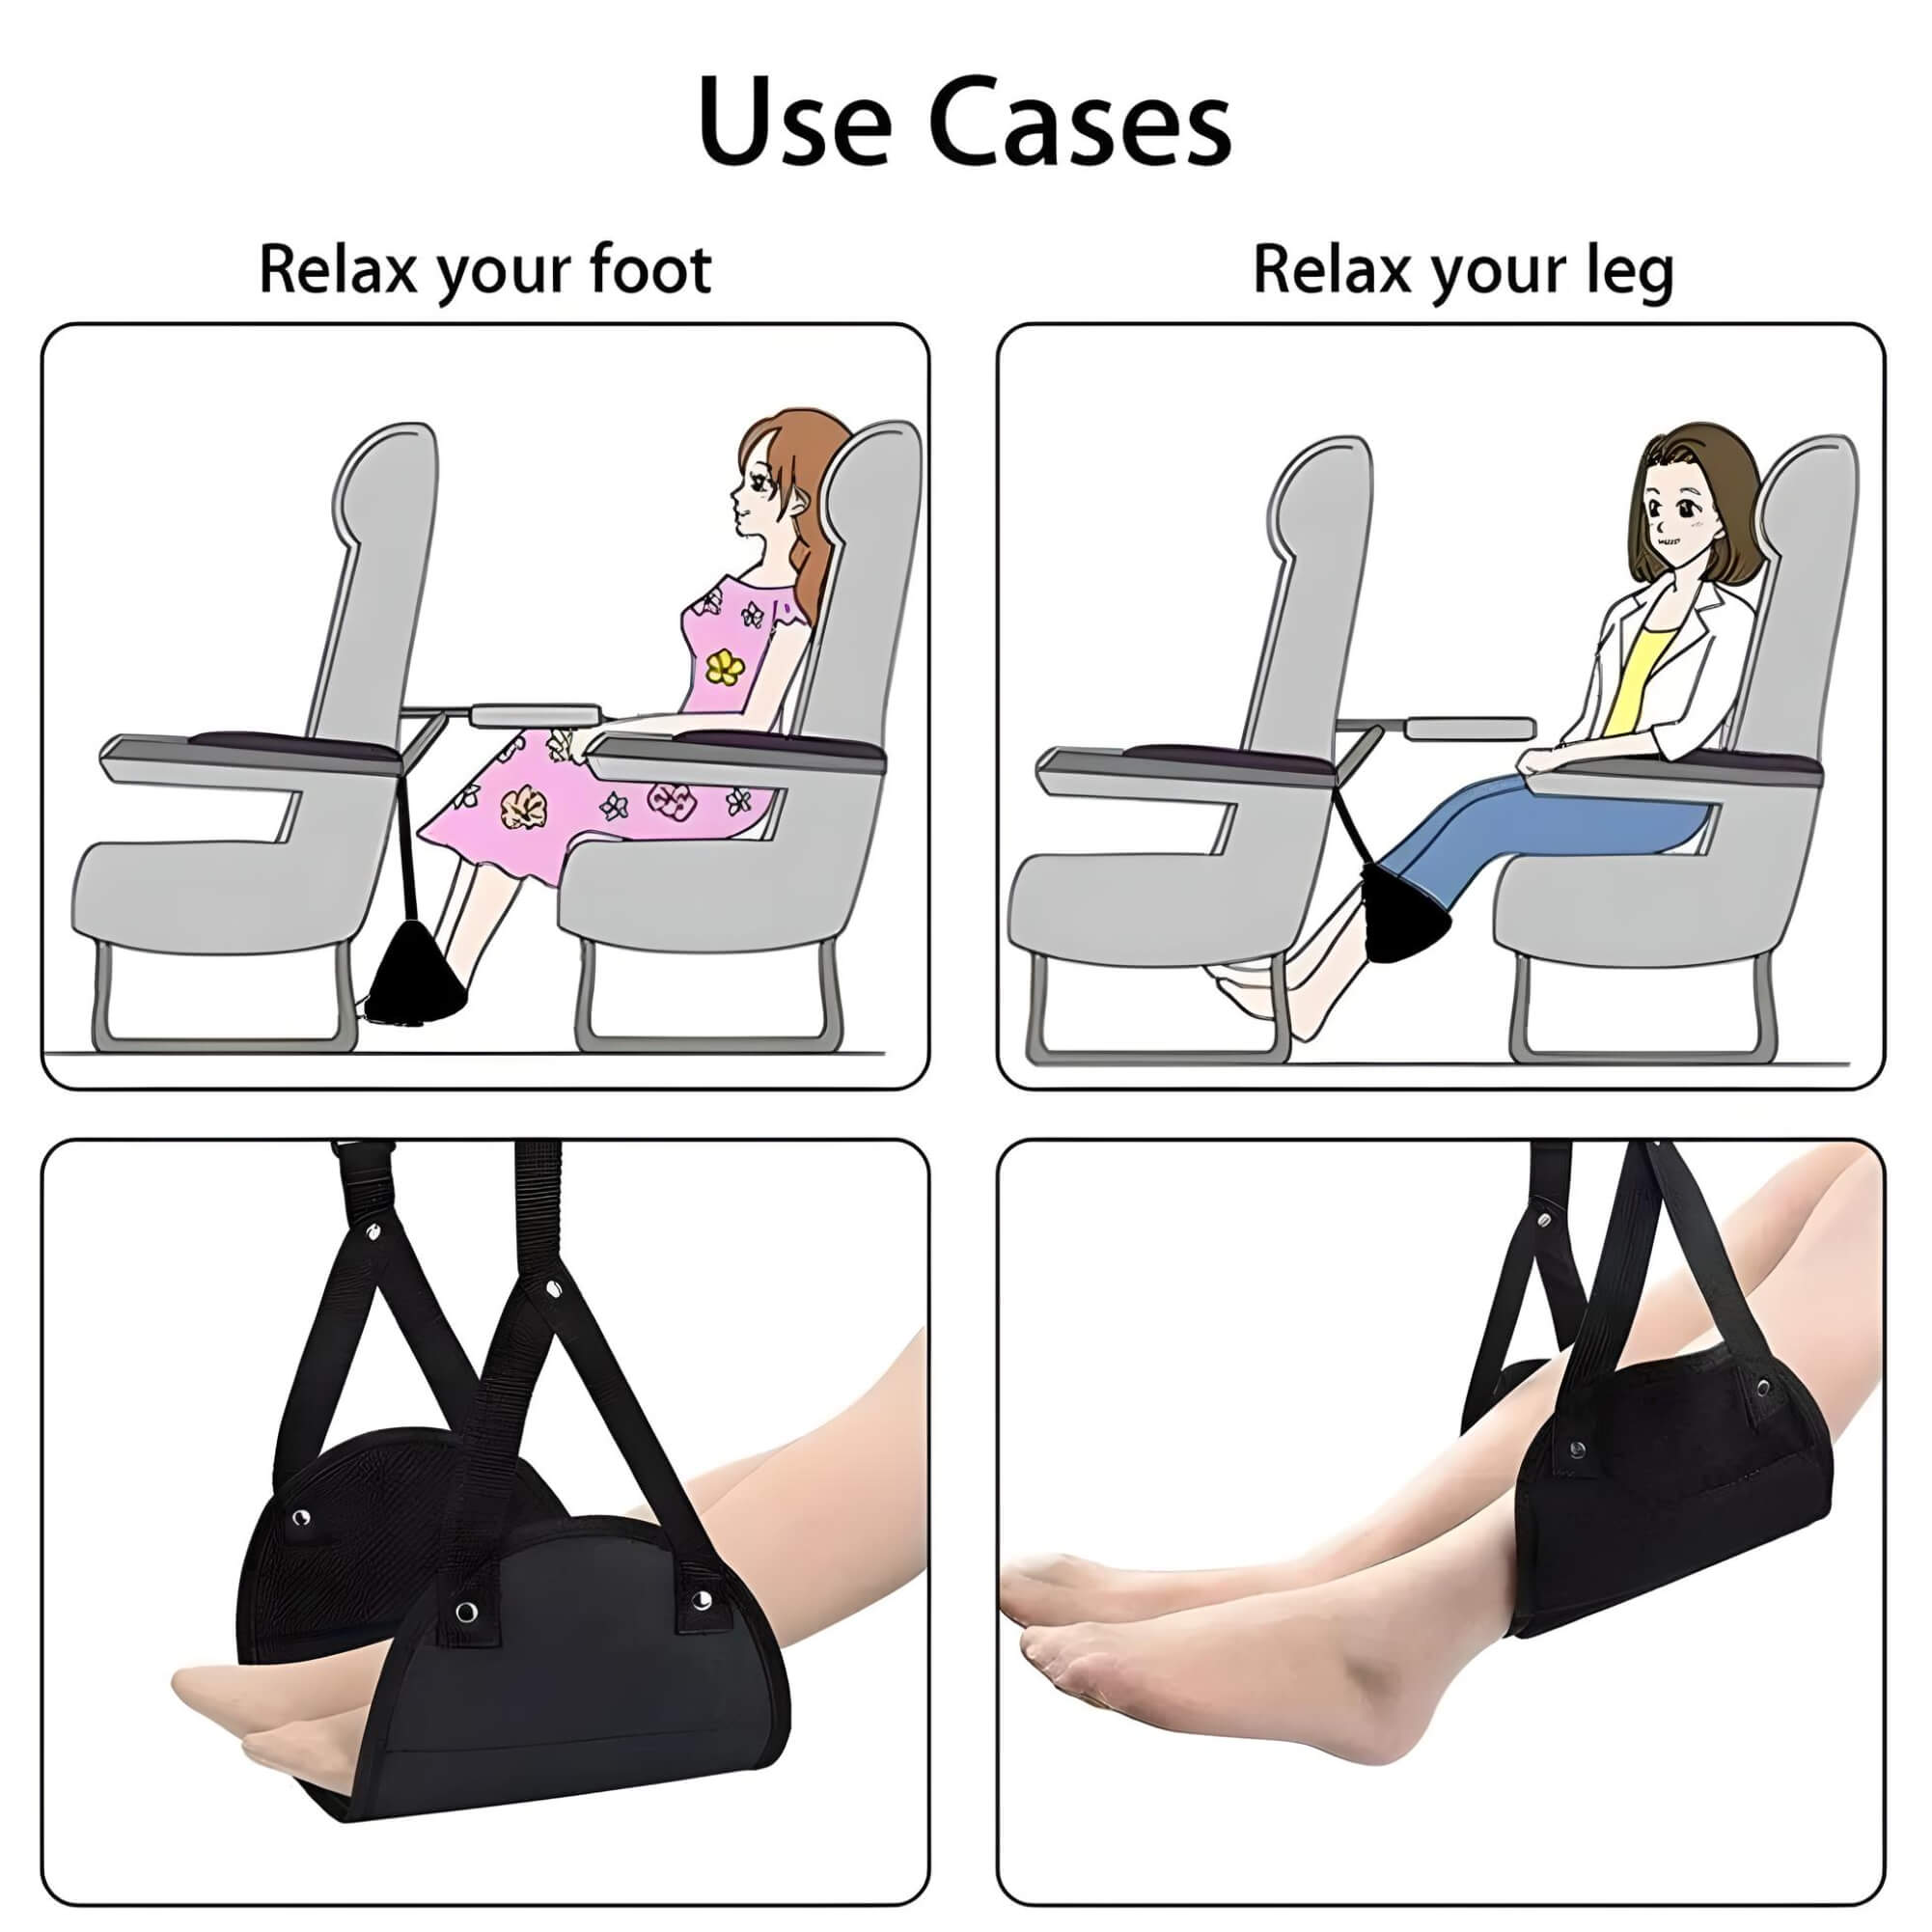 foot-rest-in-flat-able-use-cases